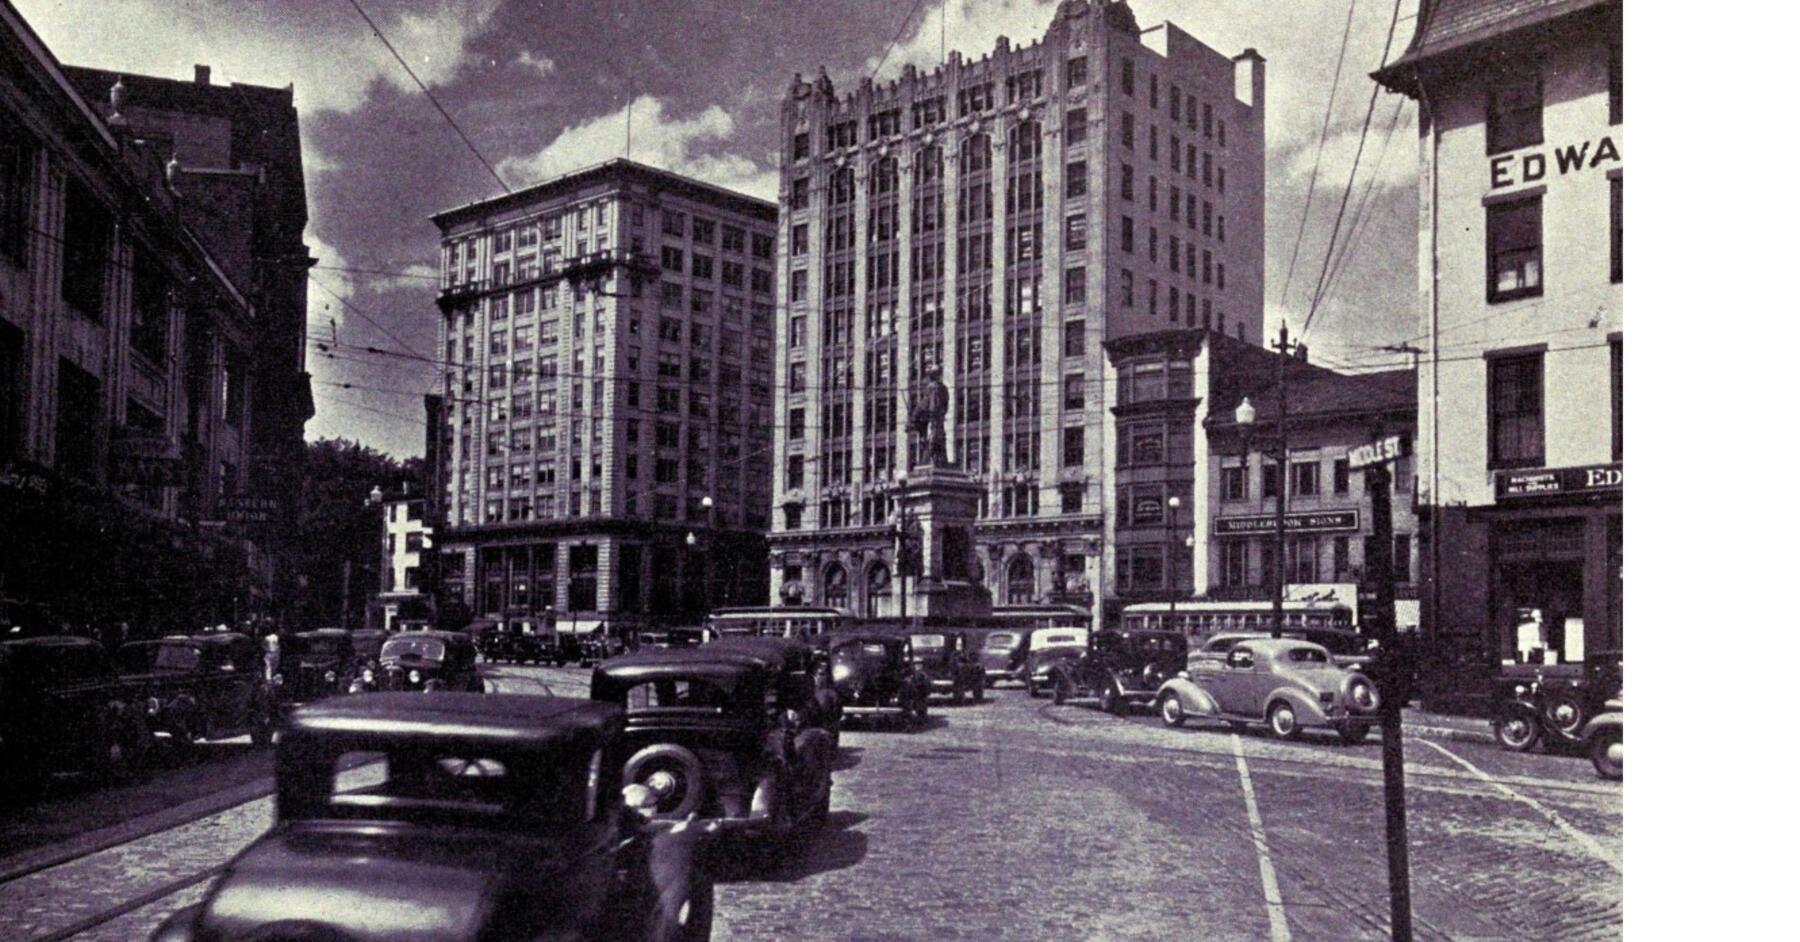 Time & Temperature Building in 1930's courtesy of Portland Maine History 1786 to Present